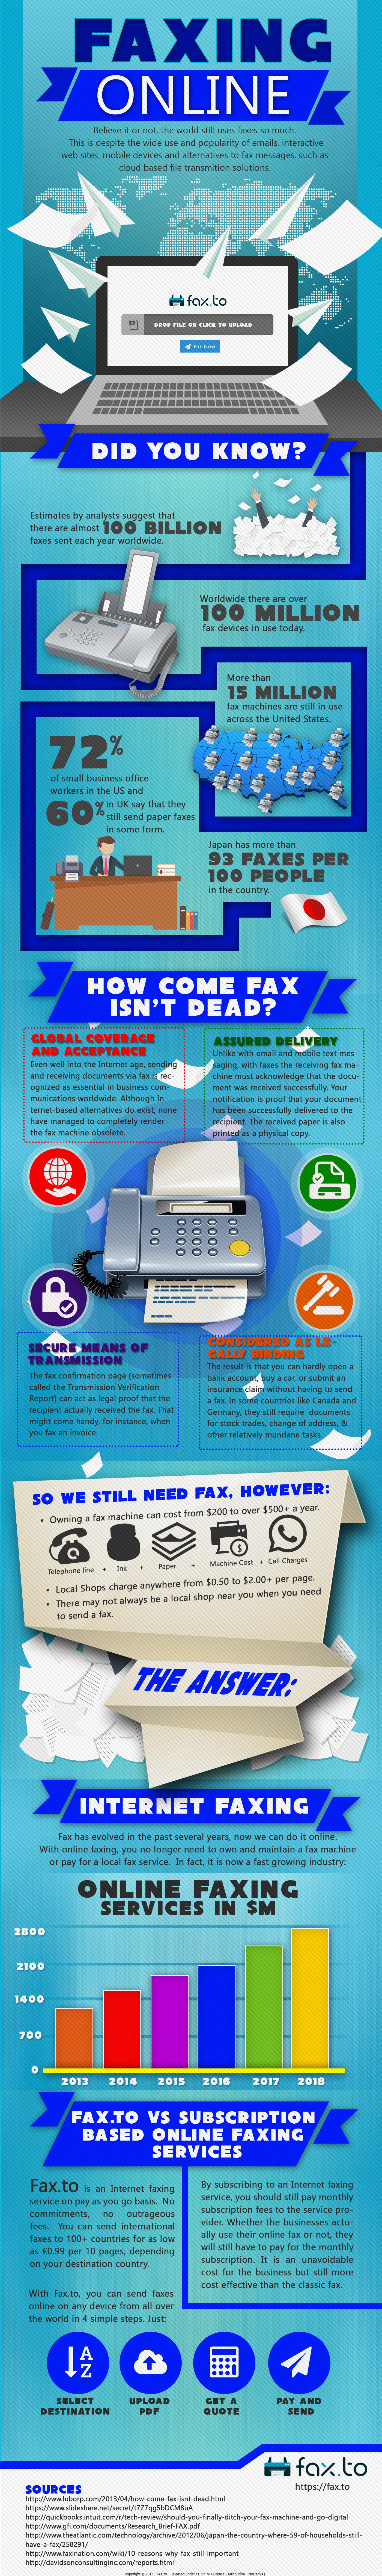 Fax Facts & Faxing Online - Infographic